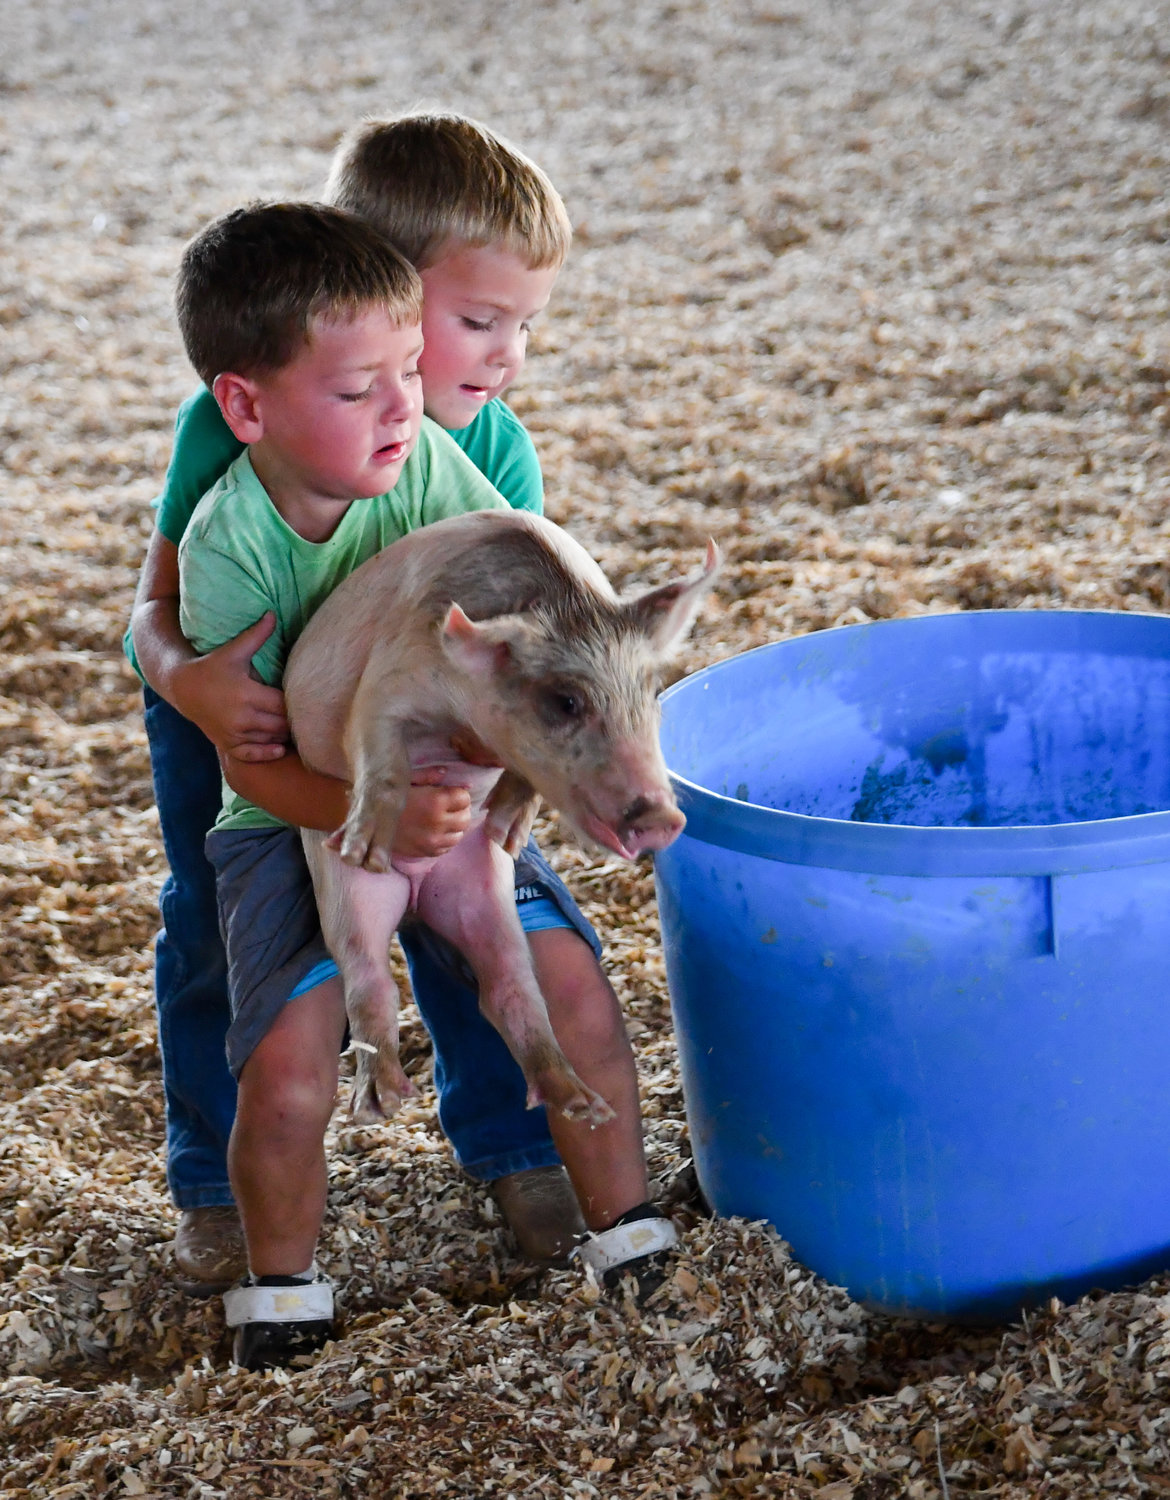 Two boys attempt to wrangle the pig in the bucket.